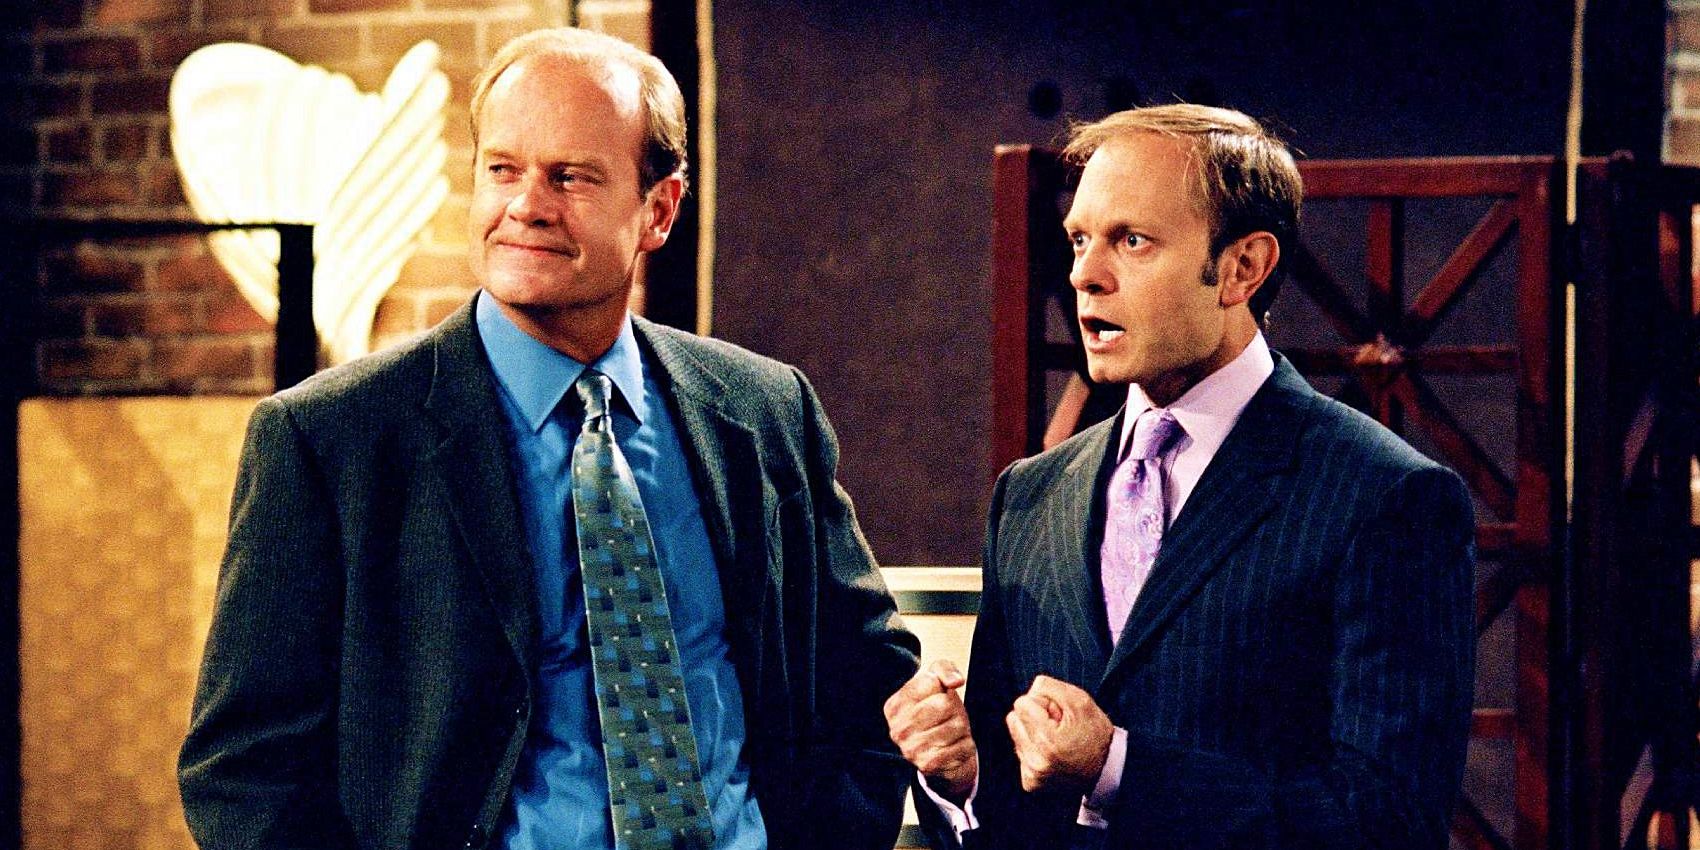 Frasier smiling while Niles has a surprised look on his face in Frasier